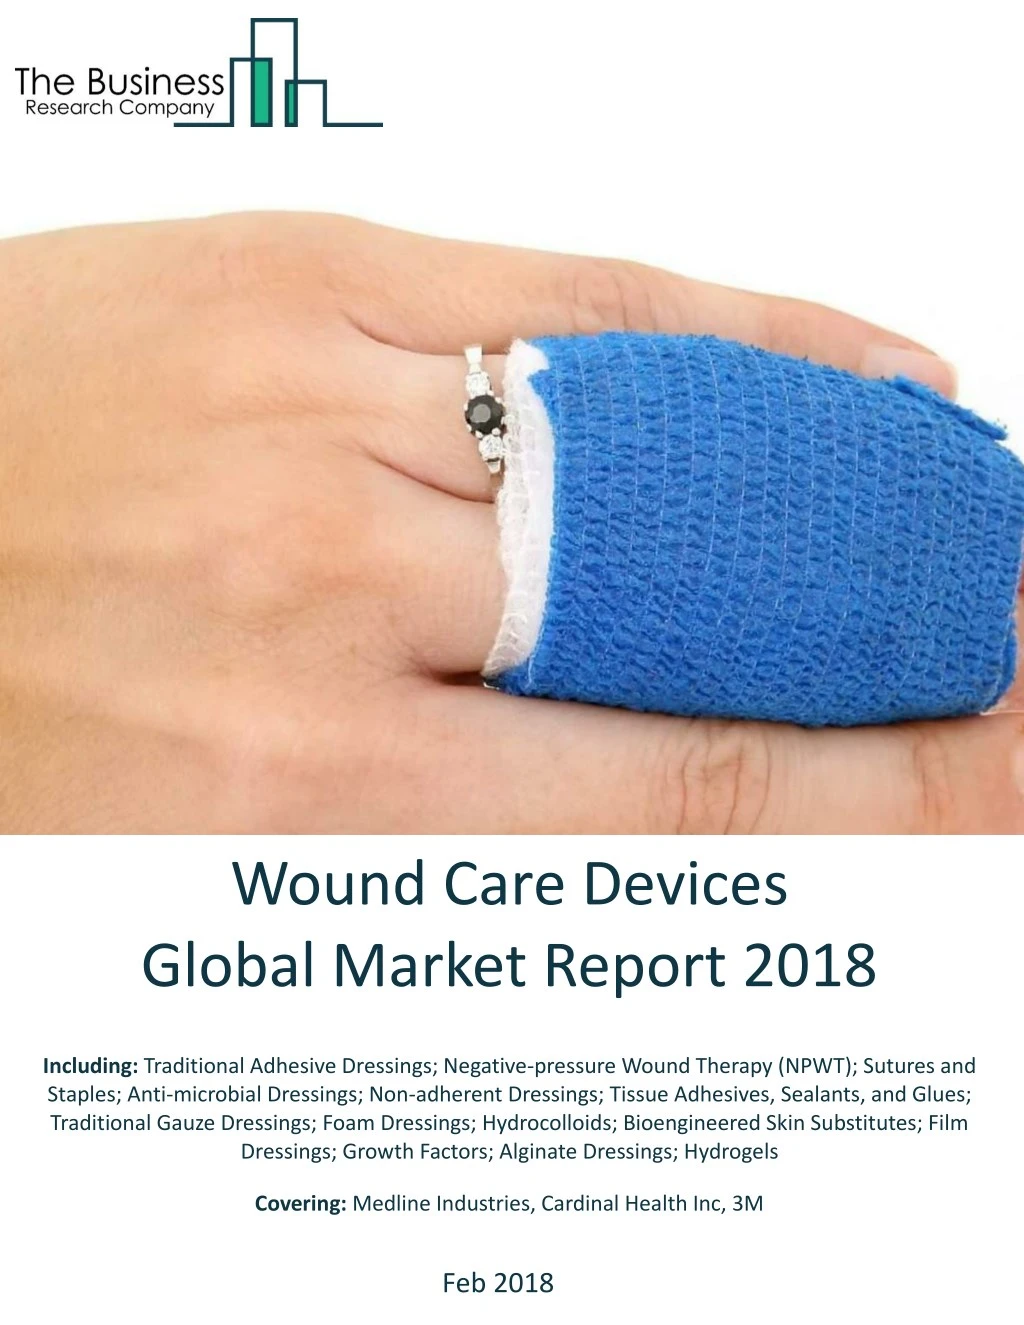 wound care devices global market report 2018